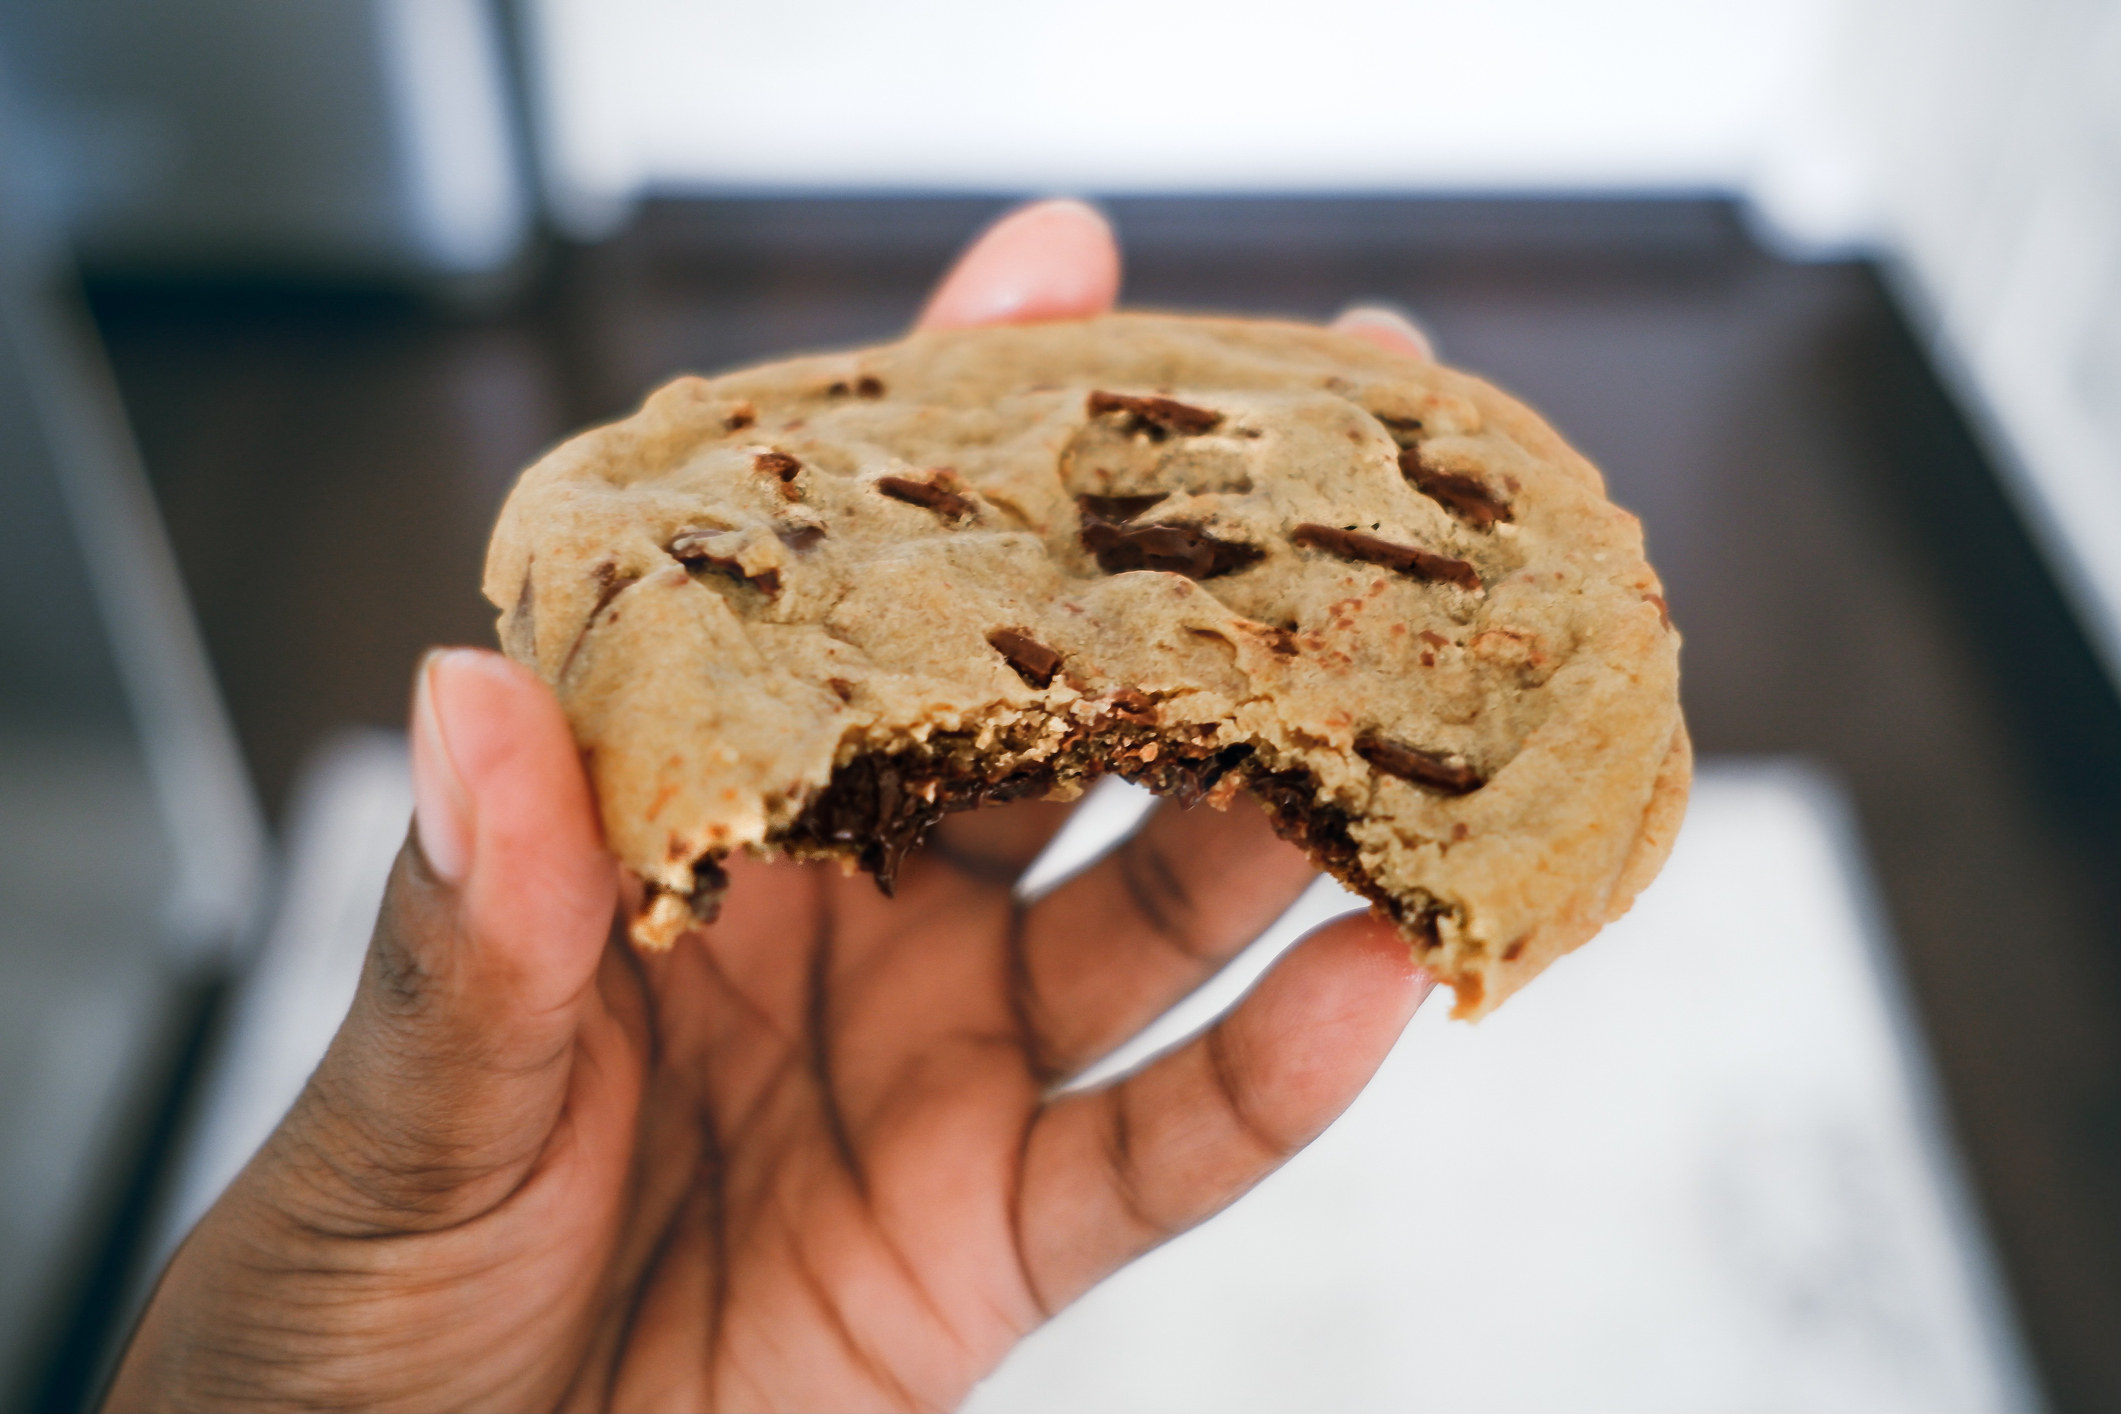 A person holding a partially eaten chocolate chip cookie